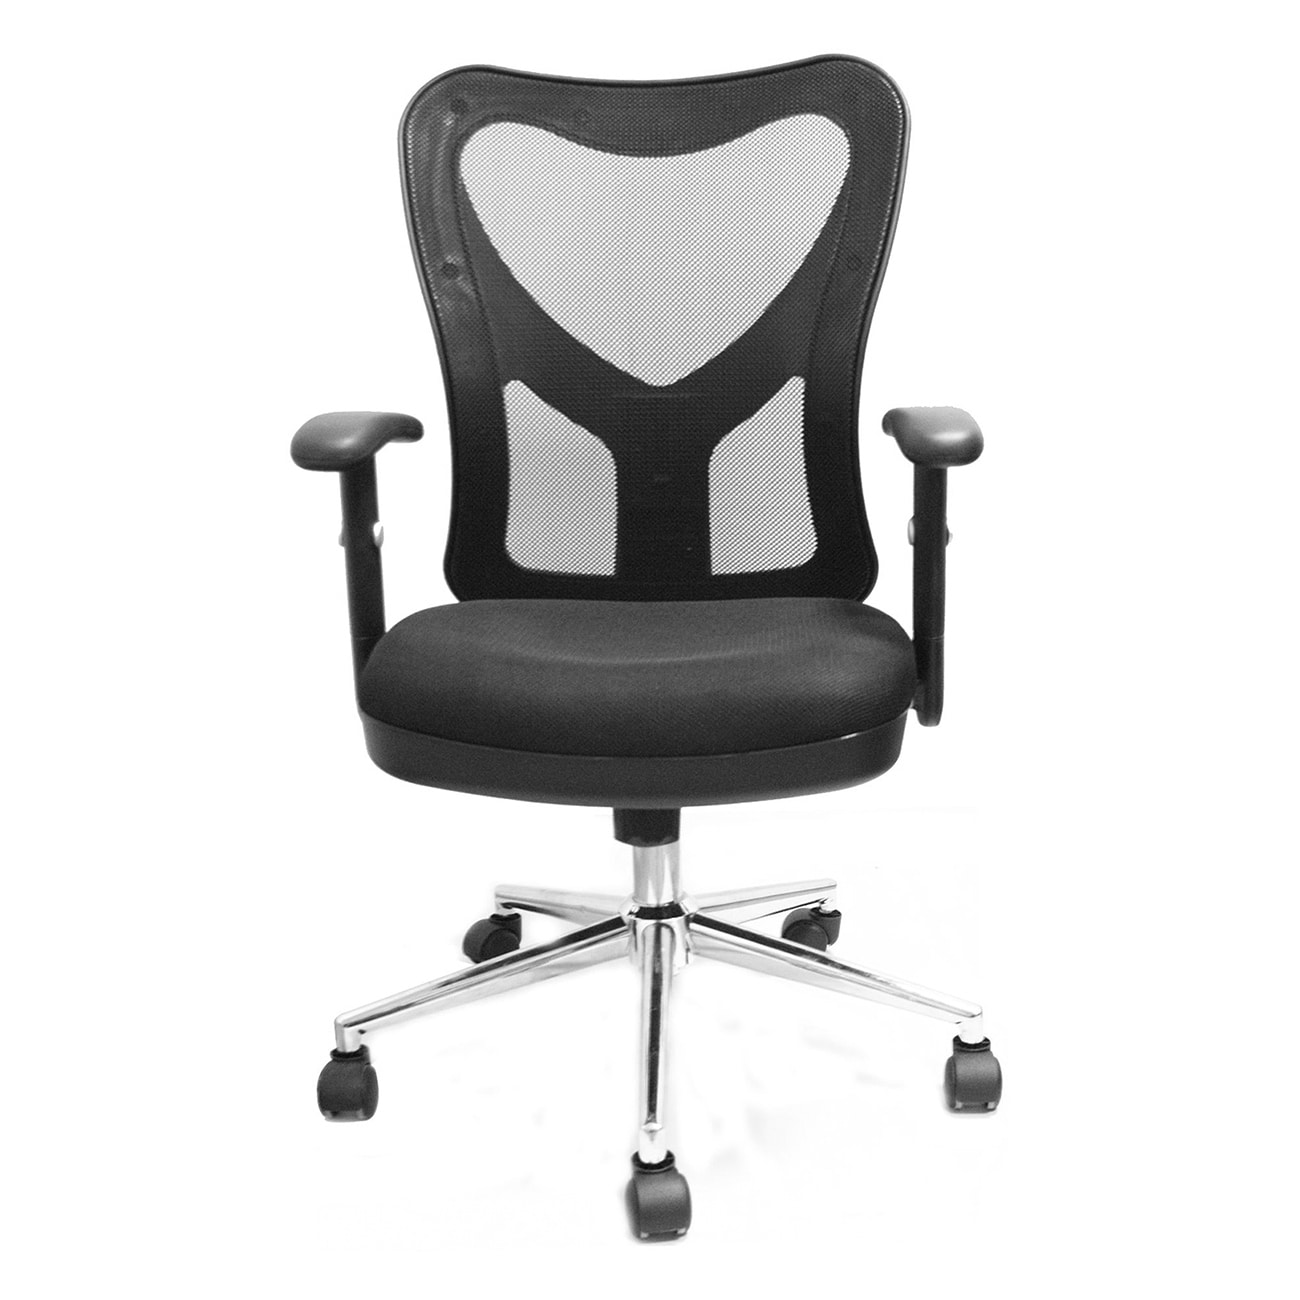 Ergonomic Breathable Mesh Adjustable Swivel Task Chair with Adjustable Arm Modern High Back Tilt Office Chairs with Casters